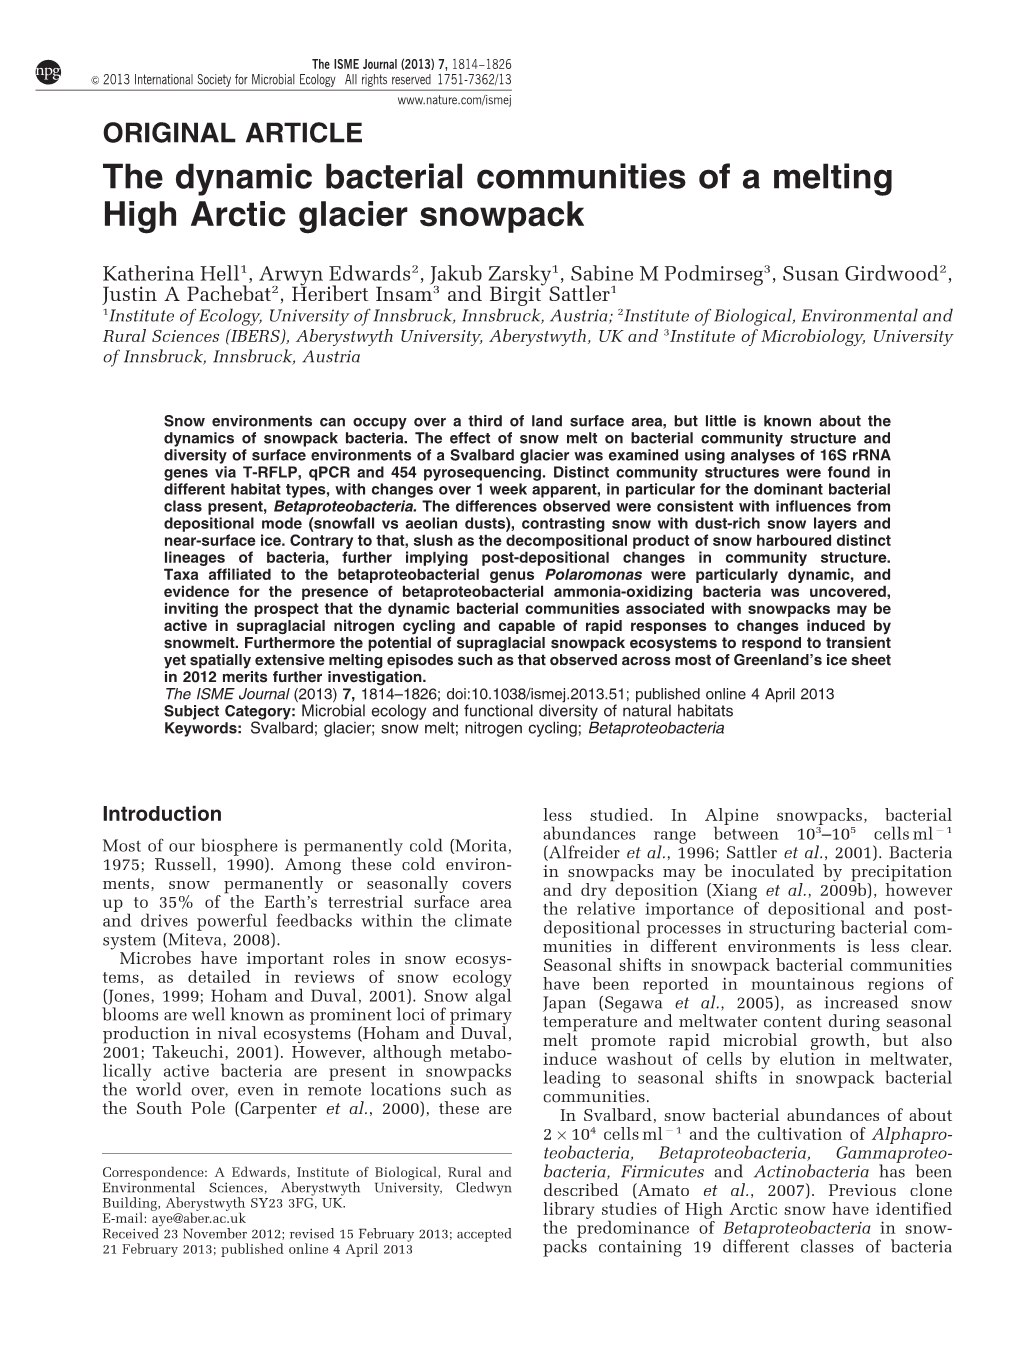 The Dynamic Bacterial Communities of a Melting High Arctic Glacier Snowpack